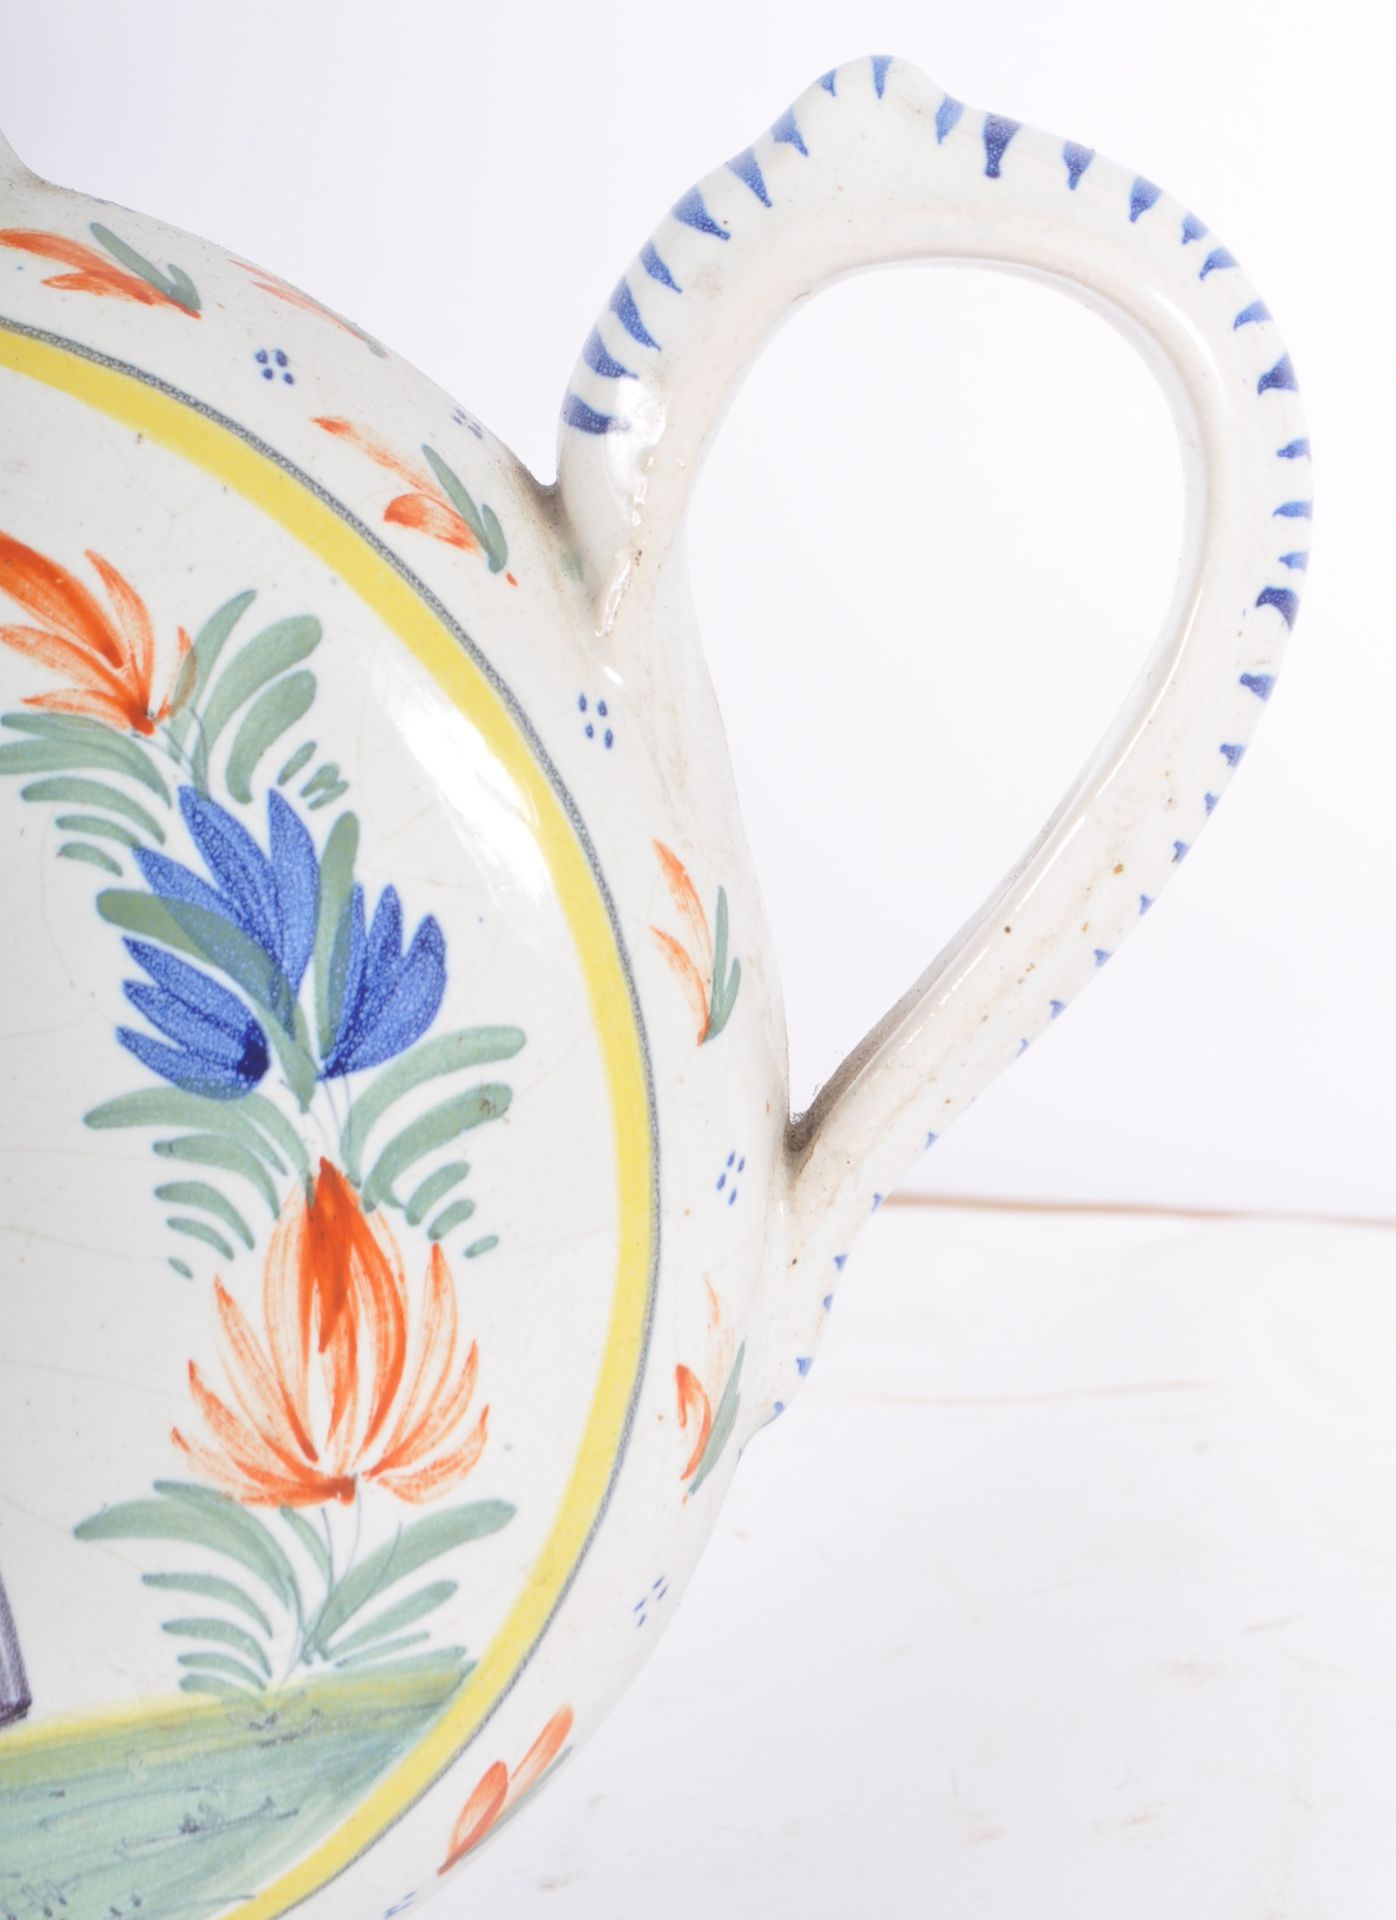 19TH CENTURY FRENCH FAIENCE TEAPOT - Image 4 of 13